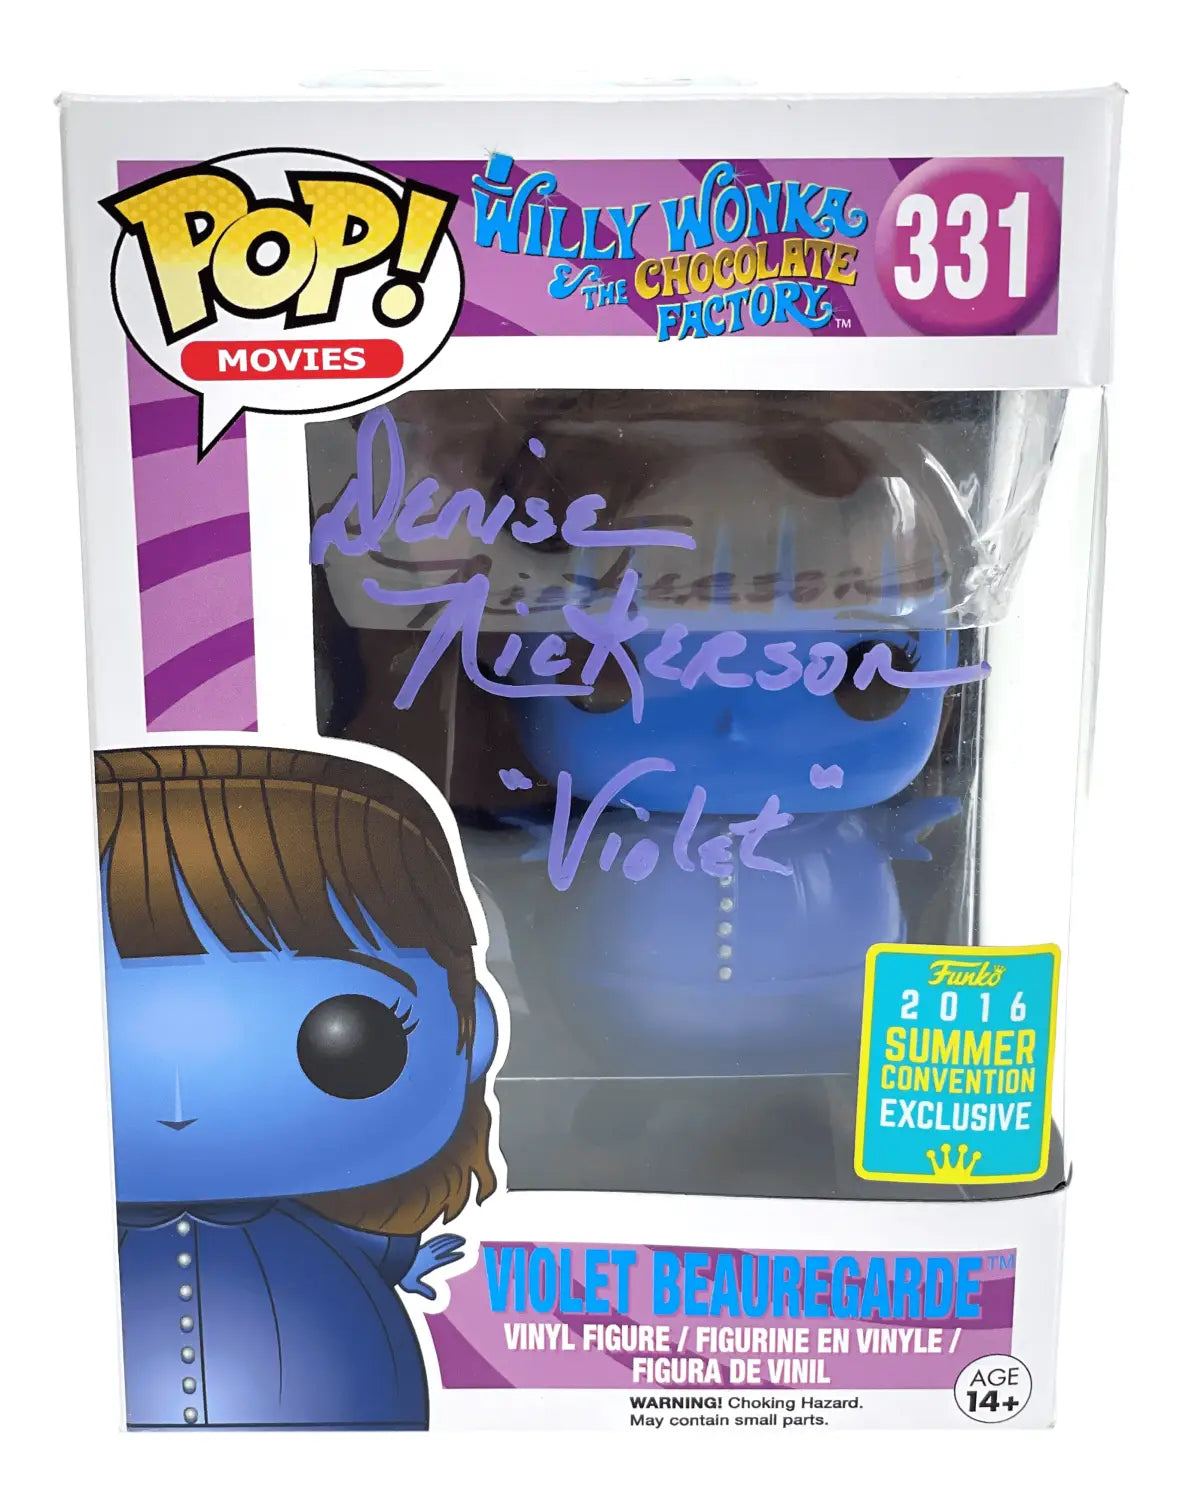 What is the Rarest Willy Wonka Autographed Funko Pop? Violet Beauregarde & Here’s Why!